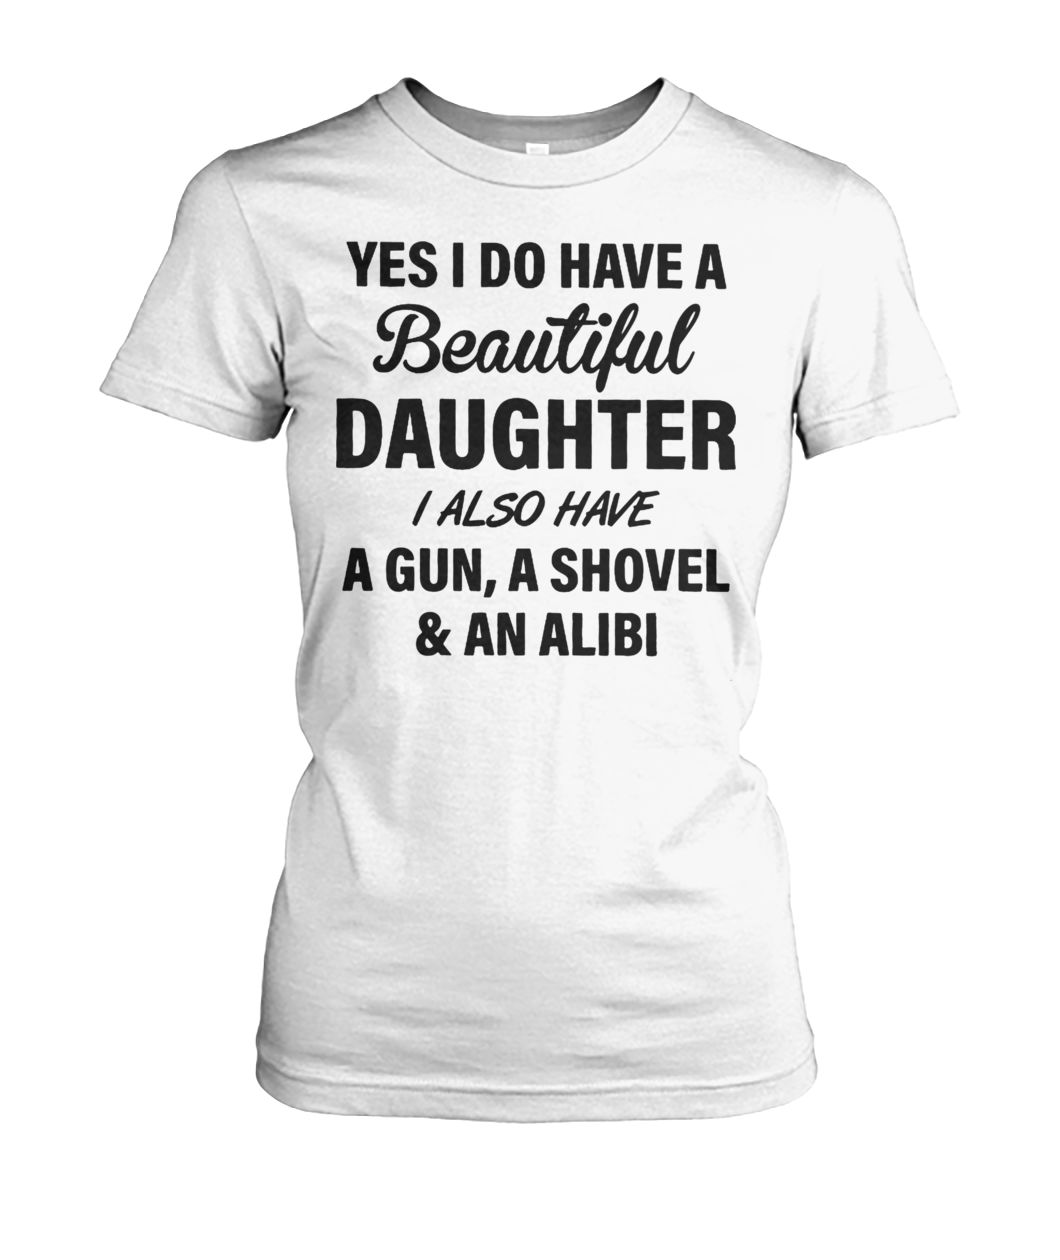 Yes I do have a beautiful daughter I also have a gun a shovel and an alibi women's crew tee